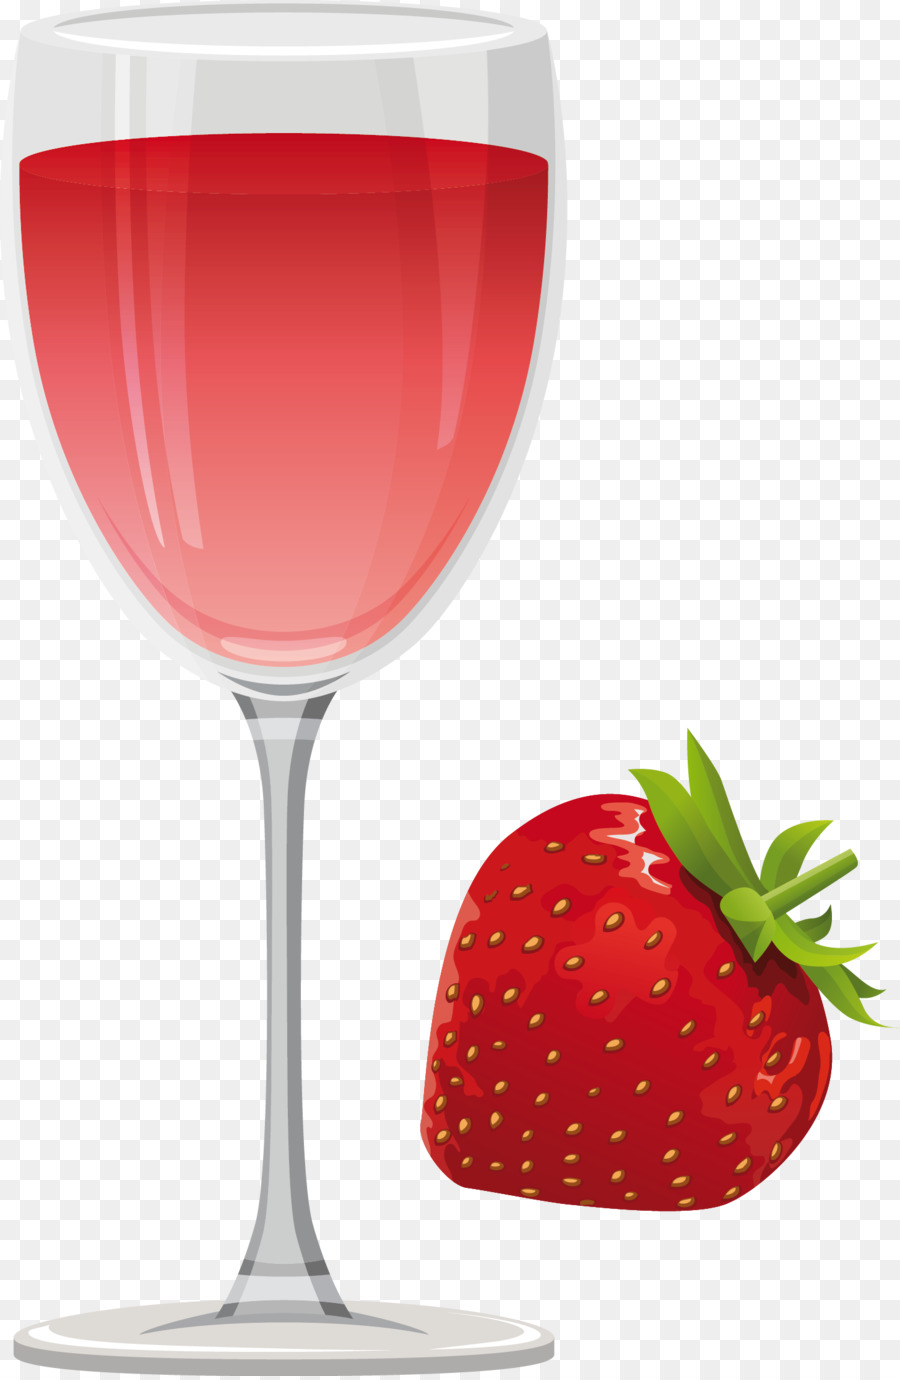 Wine glass Clip art - wine png download - 1454*2223 - Free Transparent Wine png Download.